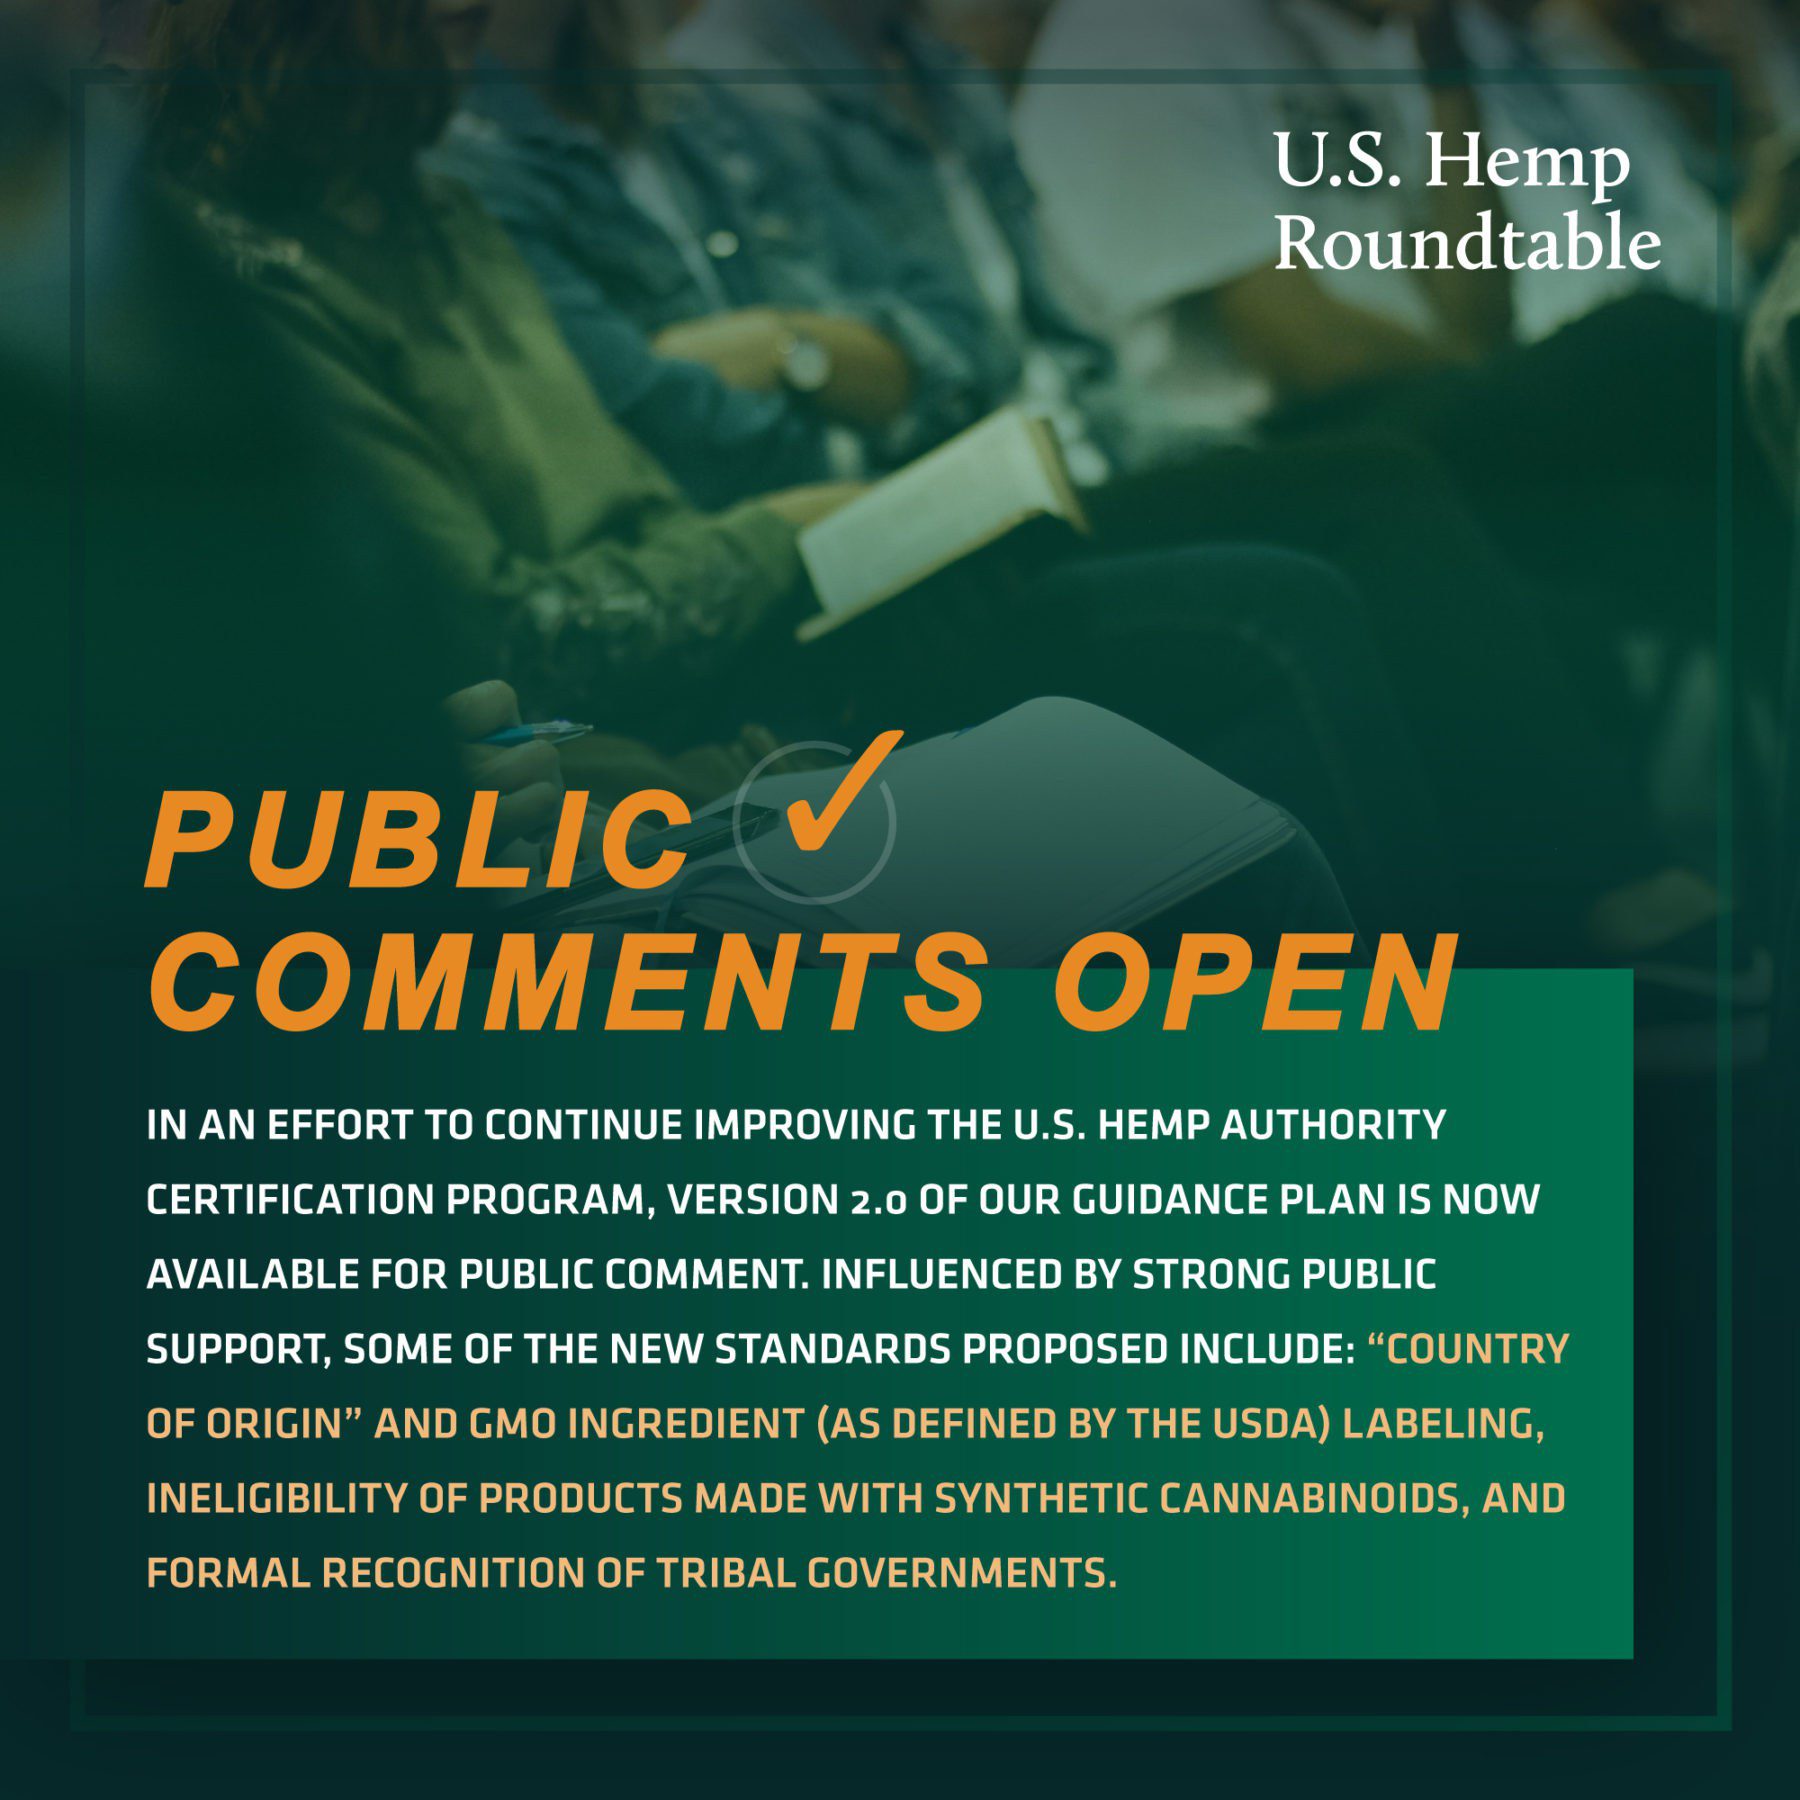 We want YOUR Comments on the US Hemp Authority’s Guidance Plan 2.0